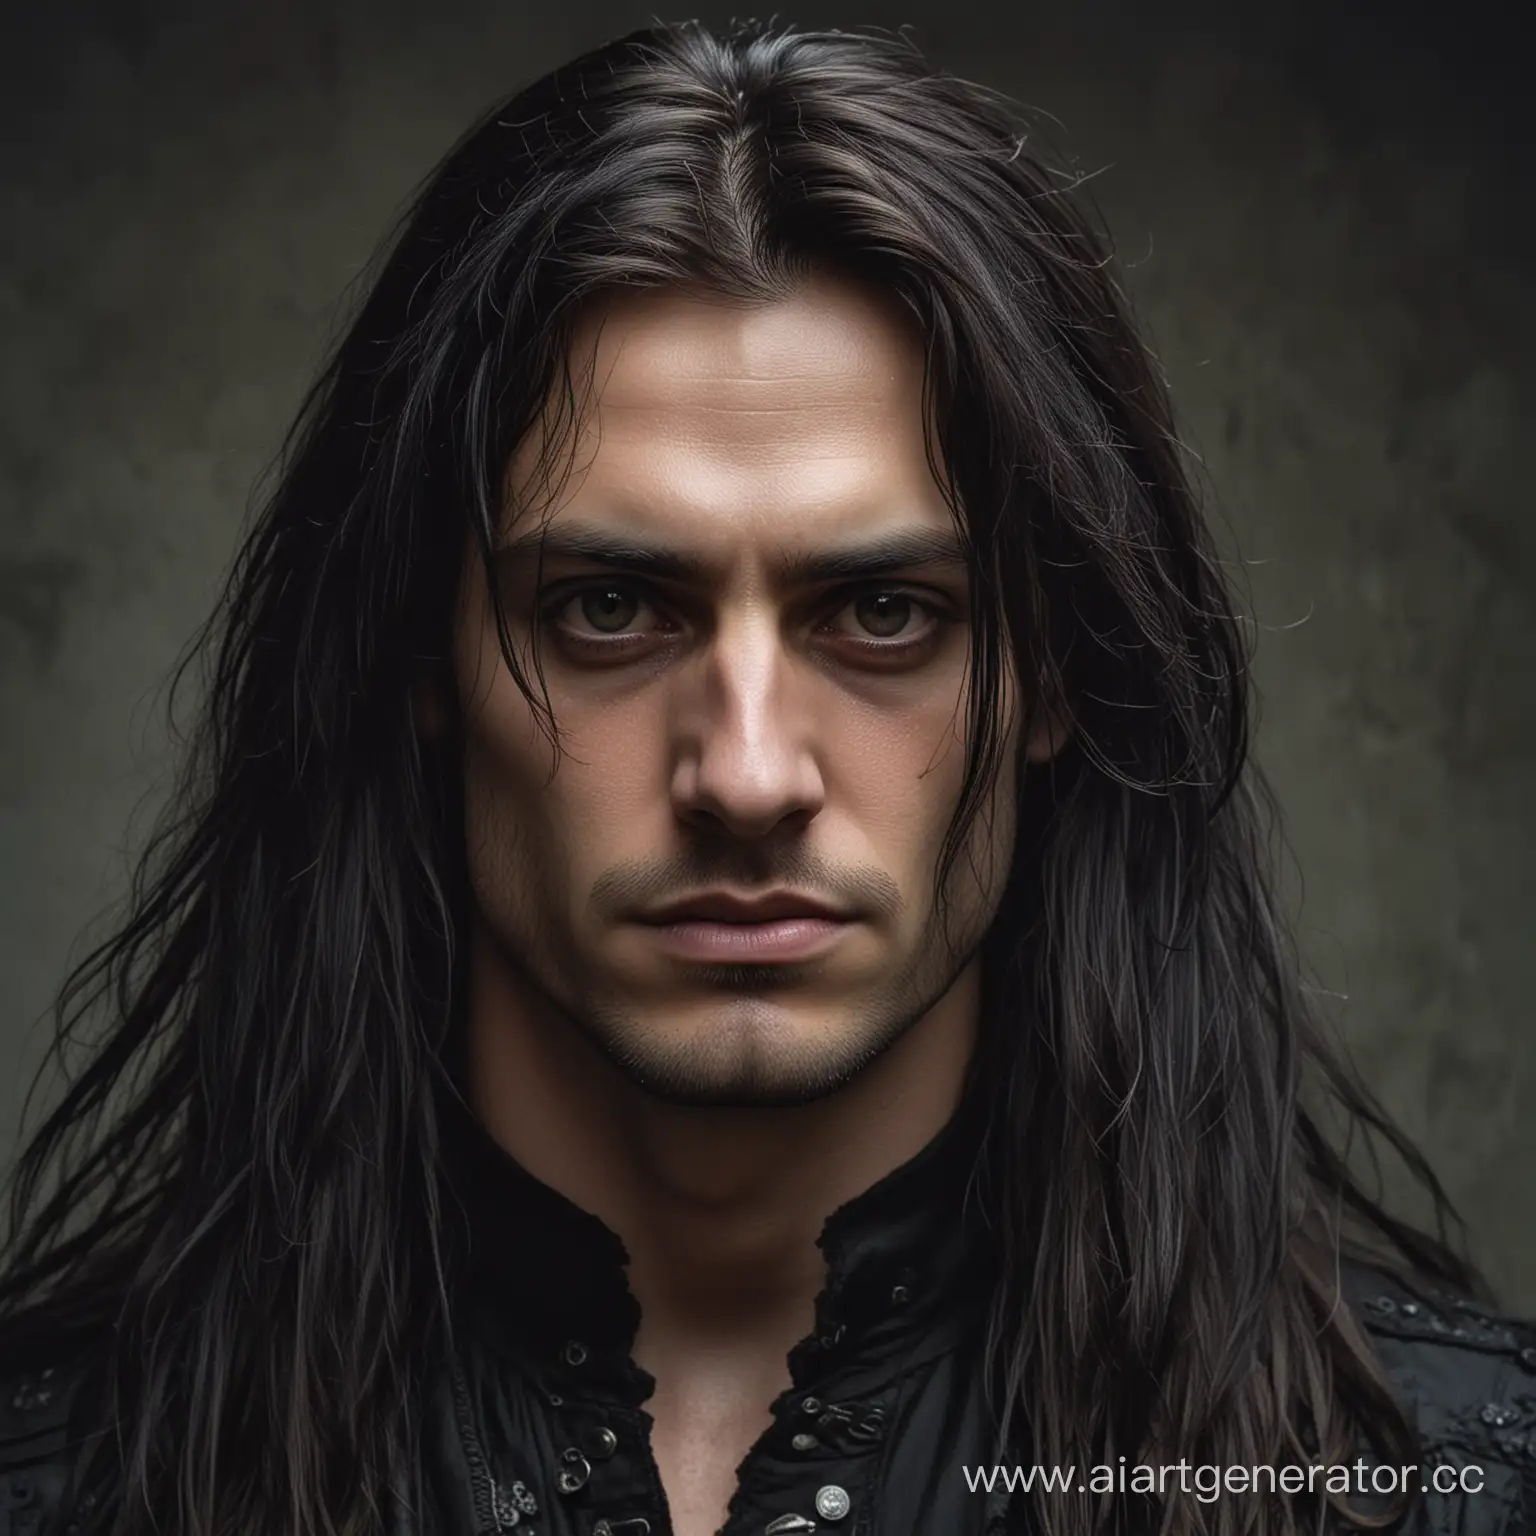 Gothic-Style-Portrait-of-a-Man-with-Dark-Eyes-and-Long-Hair